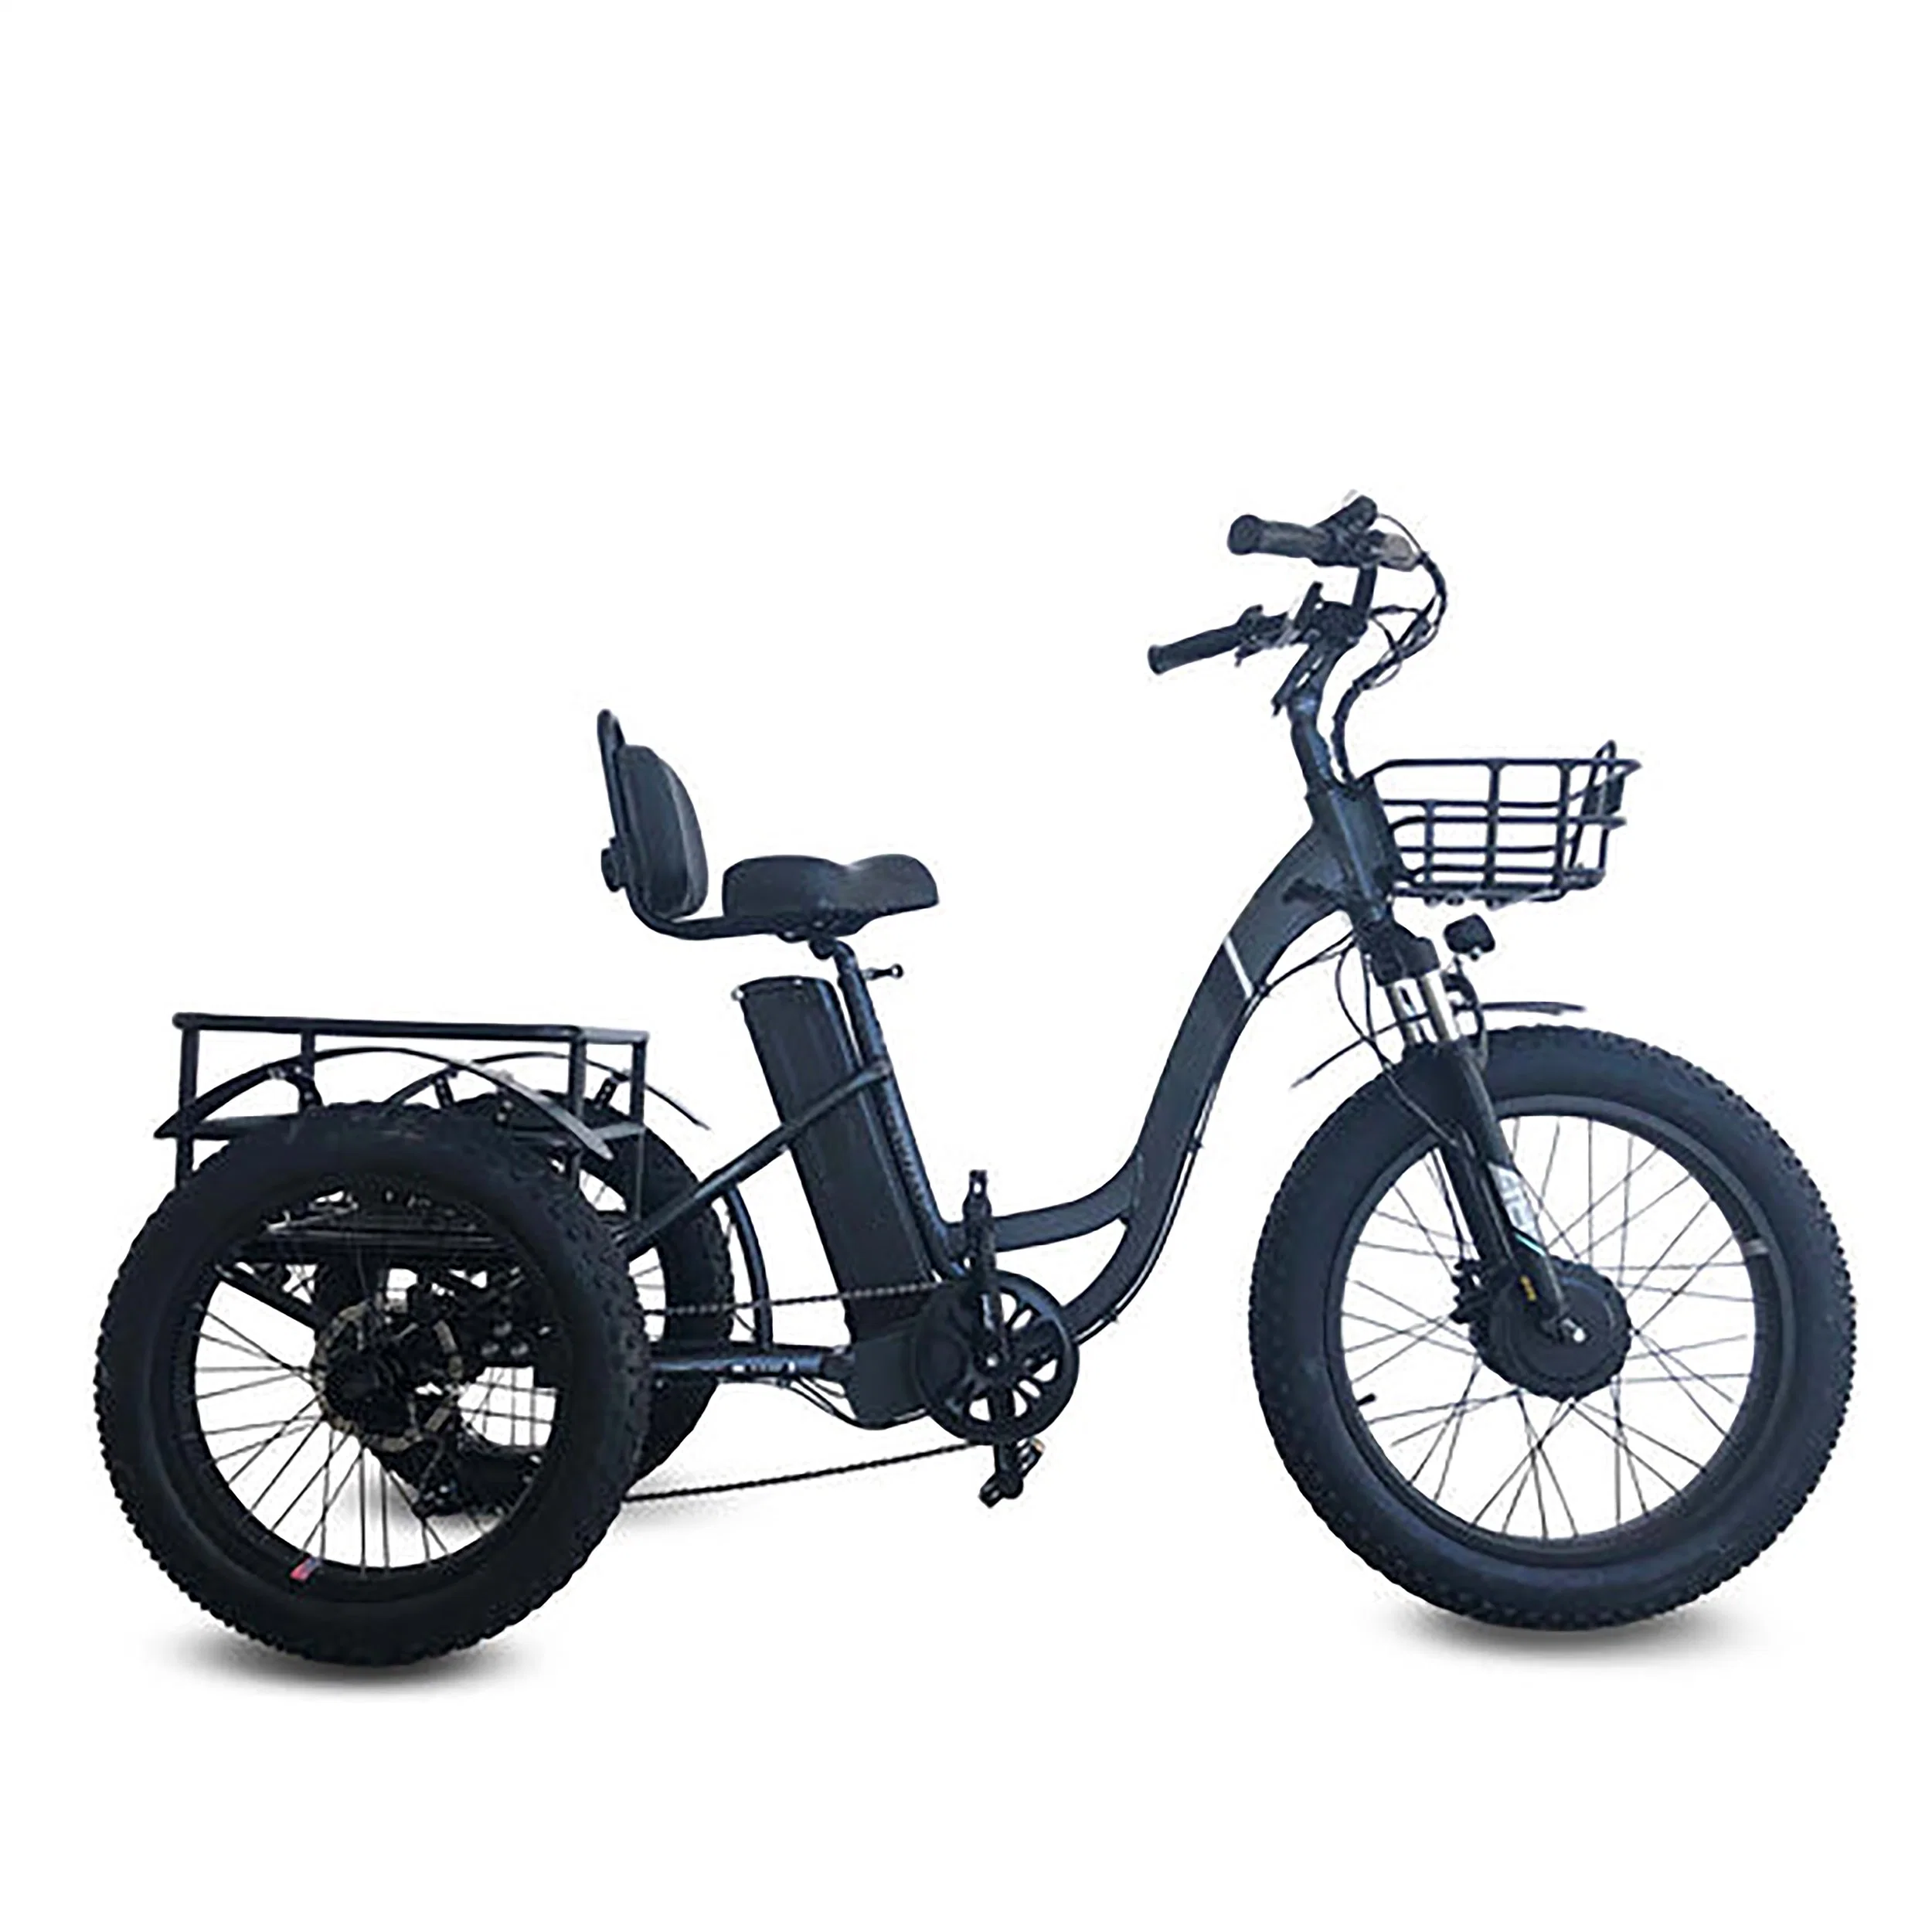 48V 500W Brushless Electric Tricycle Mini Folding Electric Trike Three Wheel MID Motor Cycle Small Tire City Cargo E Trike